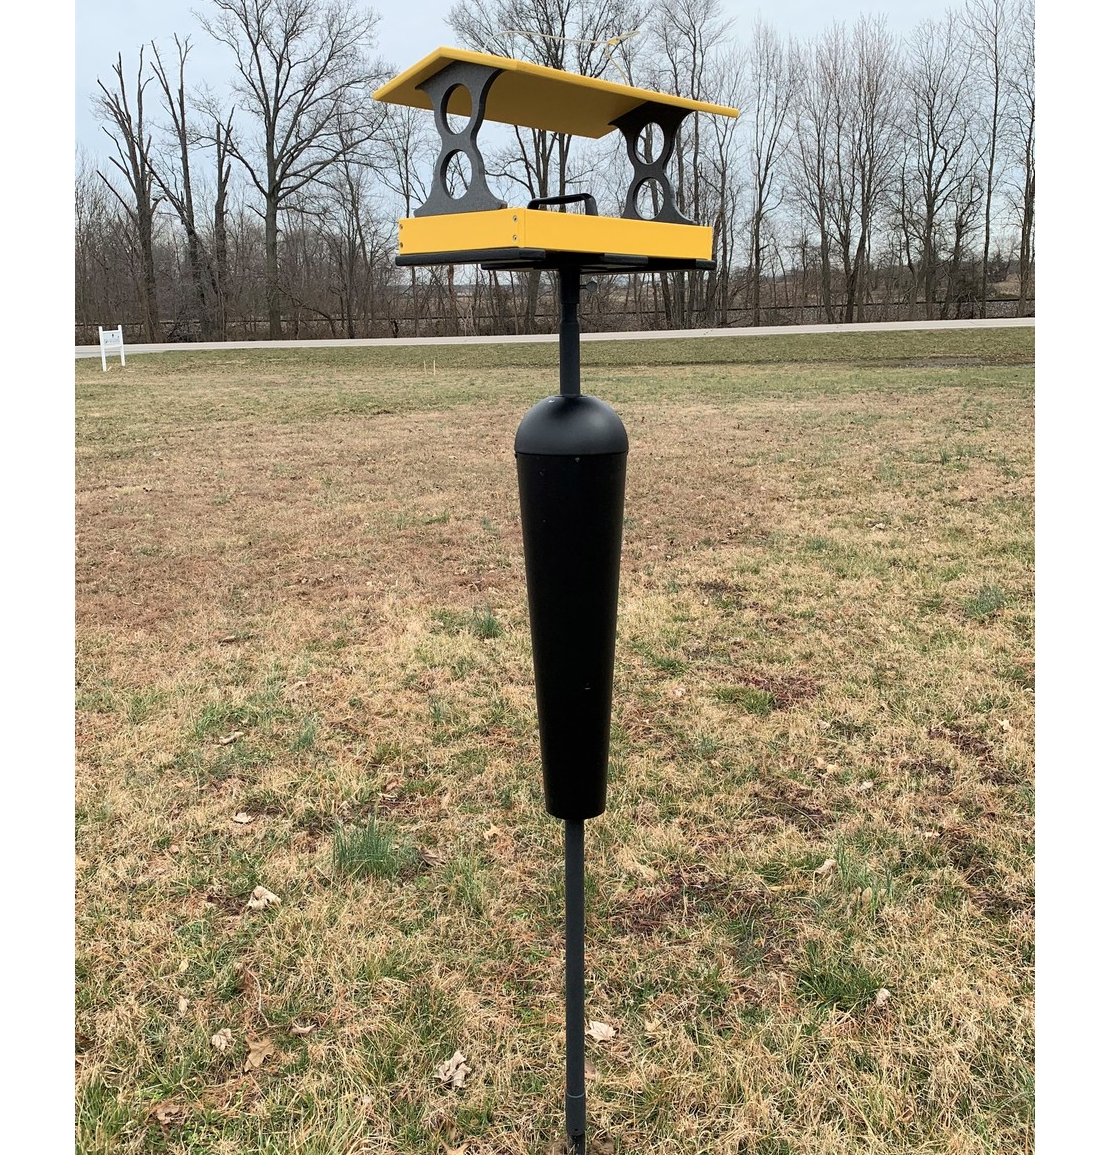 https://www.songbirdgarden.com/store/prodImages/ProdImages_Extra/20267_Yellow-Gray-5-Large-Fly-Through-Bird-Feeder-with-Squirrel-Proof-Pole-1.jpg